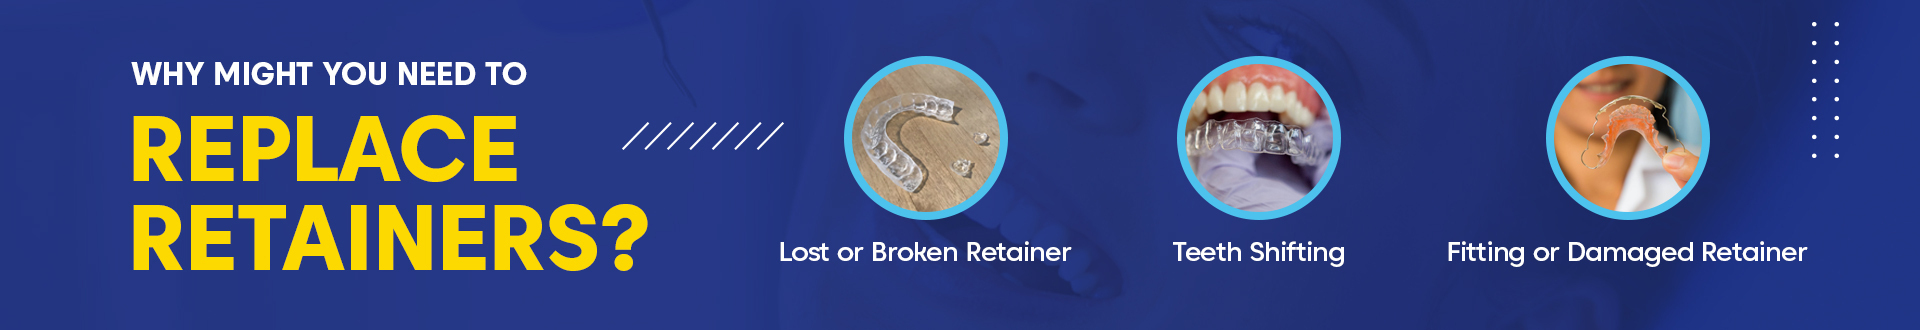 how can i get a new retainer